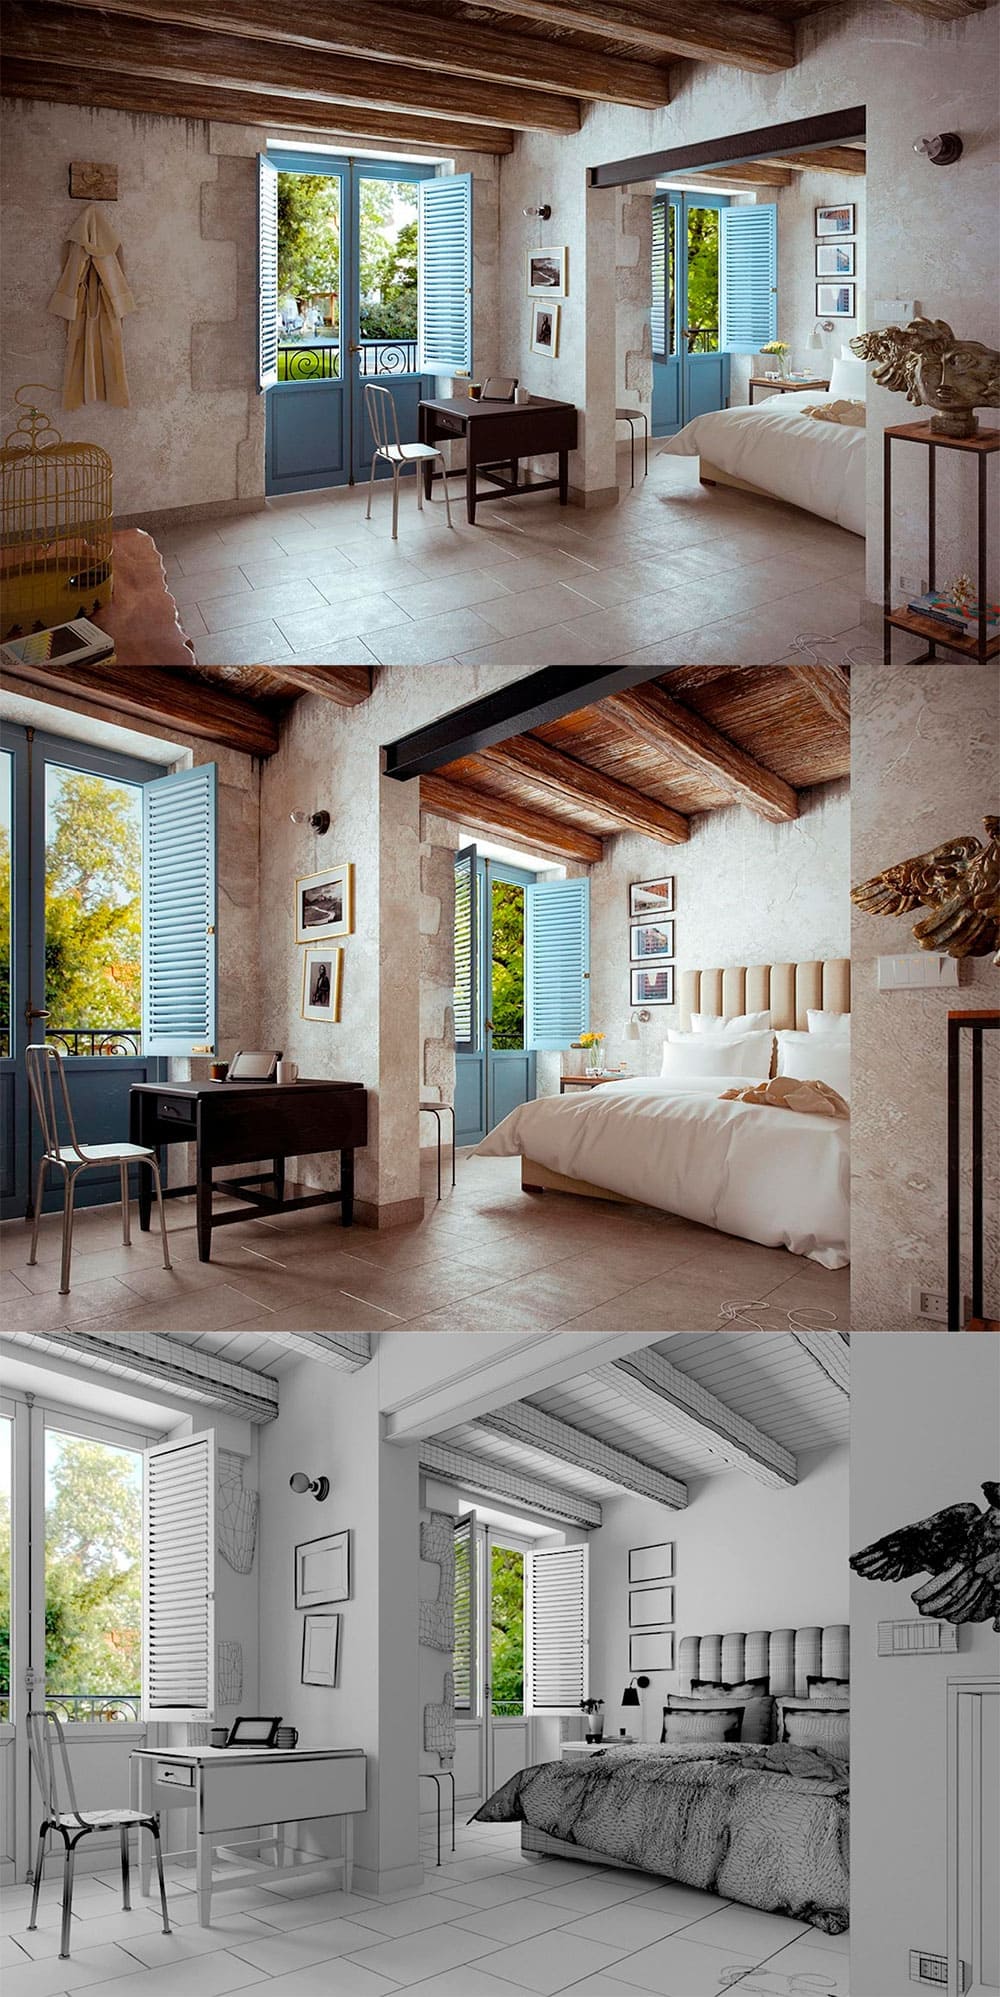 In 2 countryside bedroom, picture for pinterest.